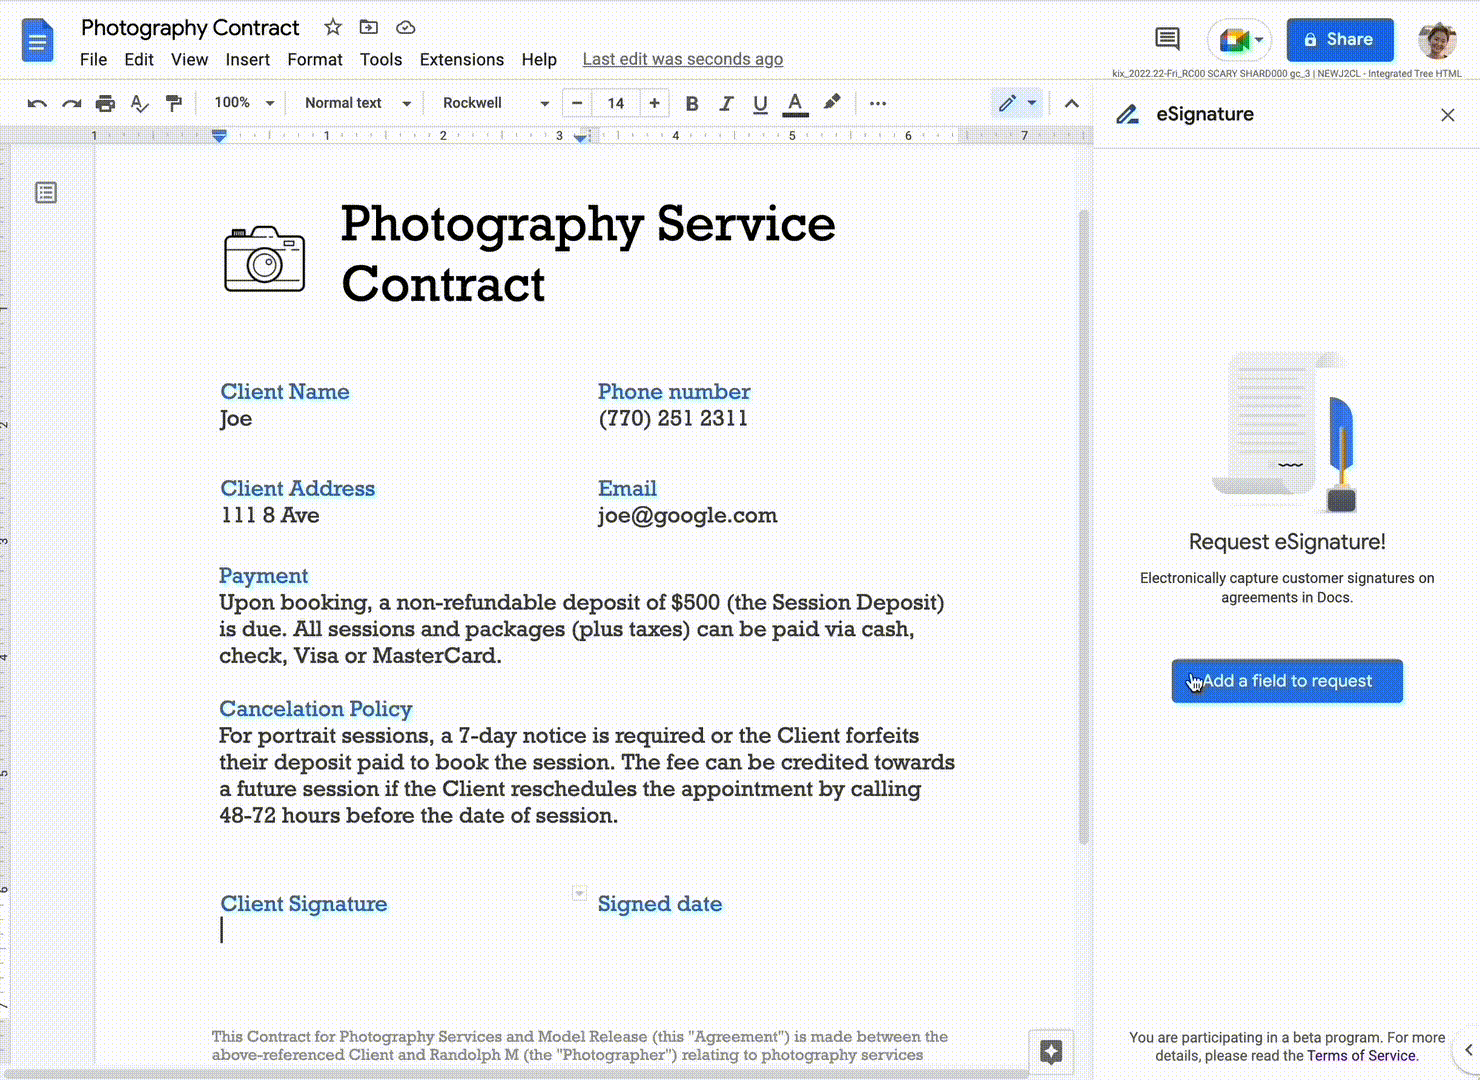 Animation of the process of inserting electronic signature fields in Google Docs